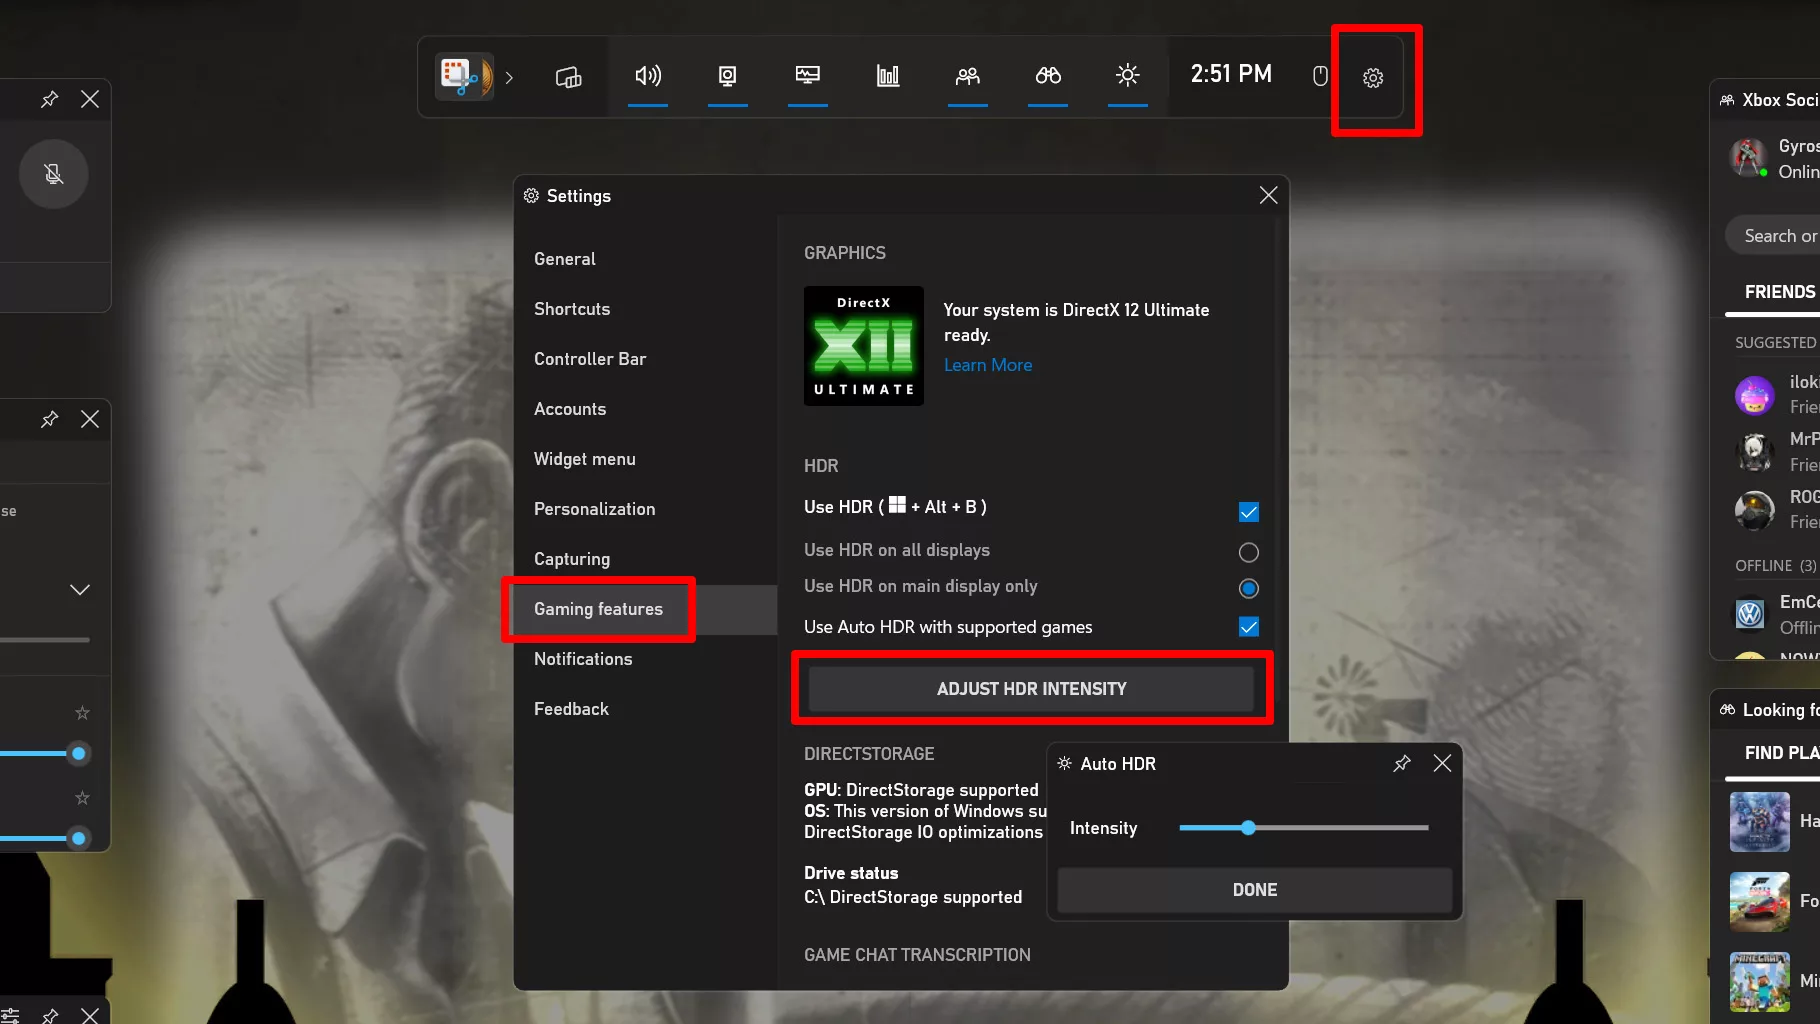 A screenshot of the Windows Auto HDR menu, with the intensity slider ramped up to 25%.